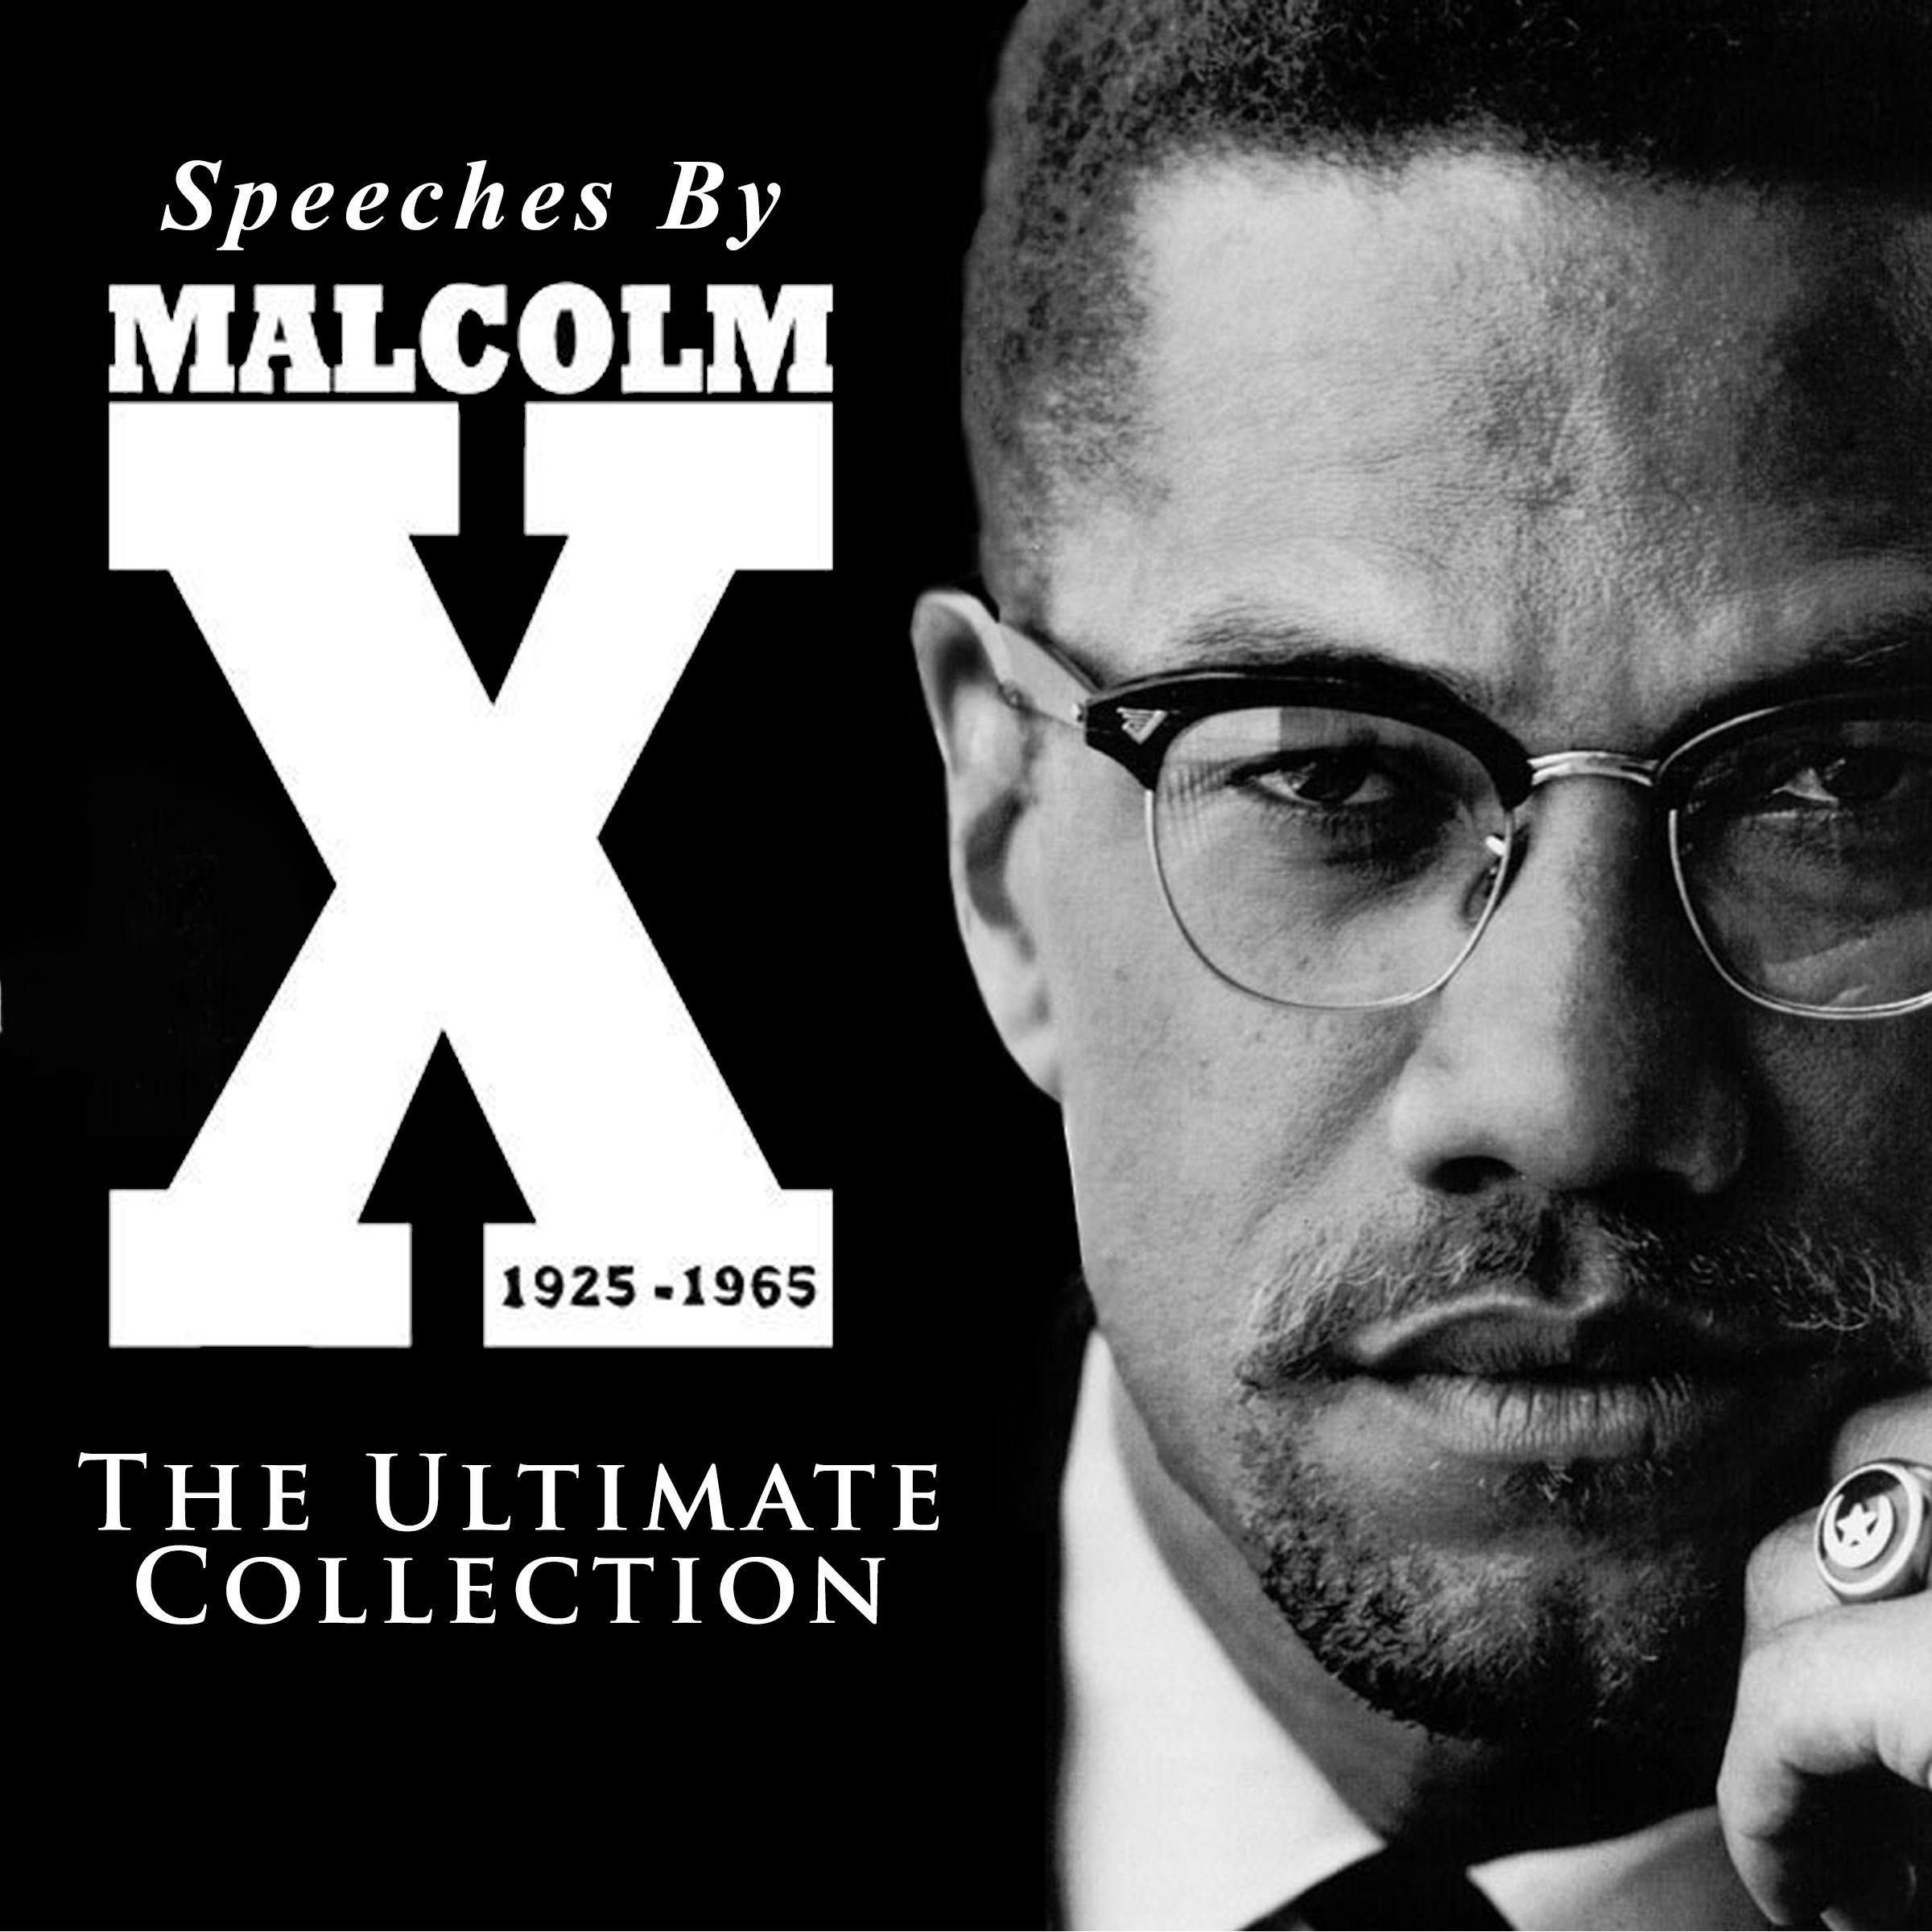 Speeches by Malcolm X, 1925-1965: The Ultimate Collection - Malcolm X